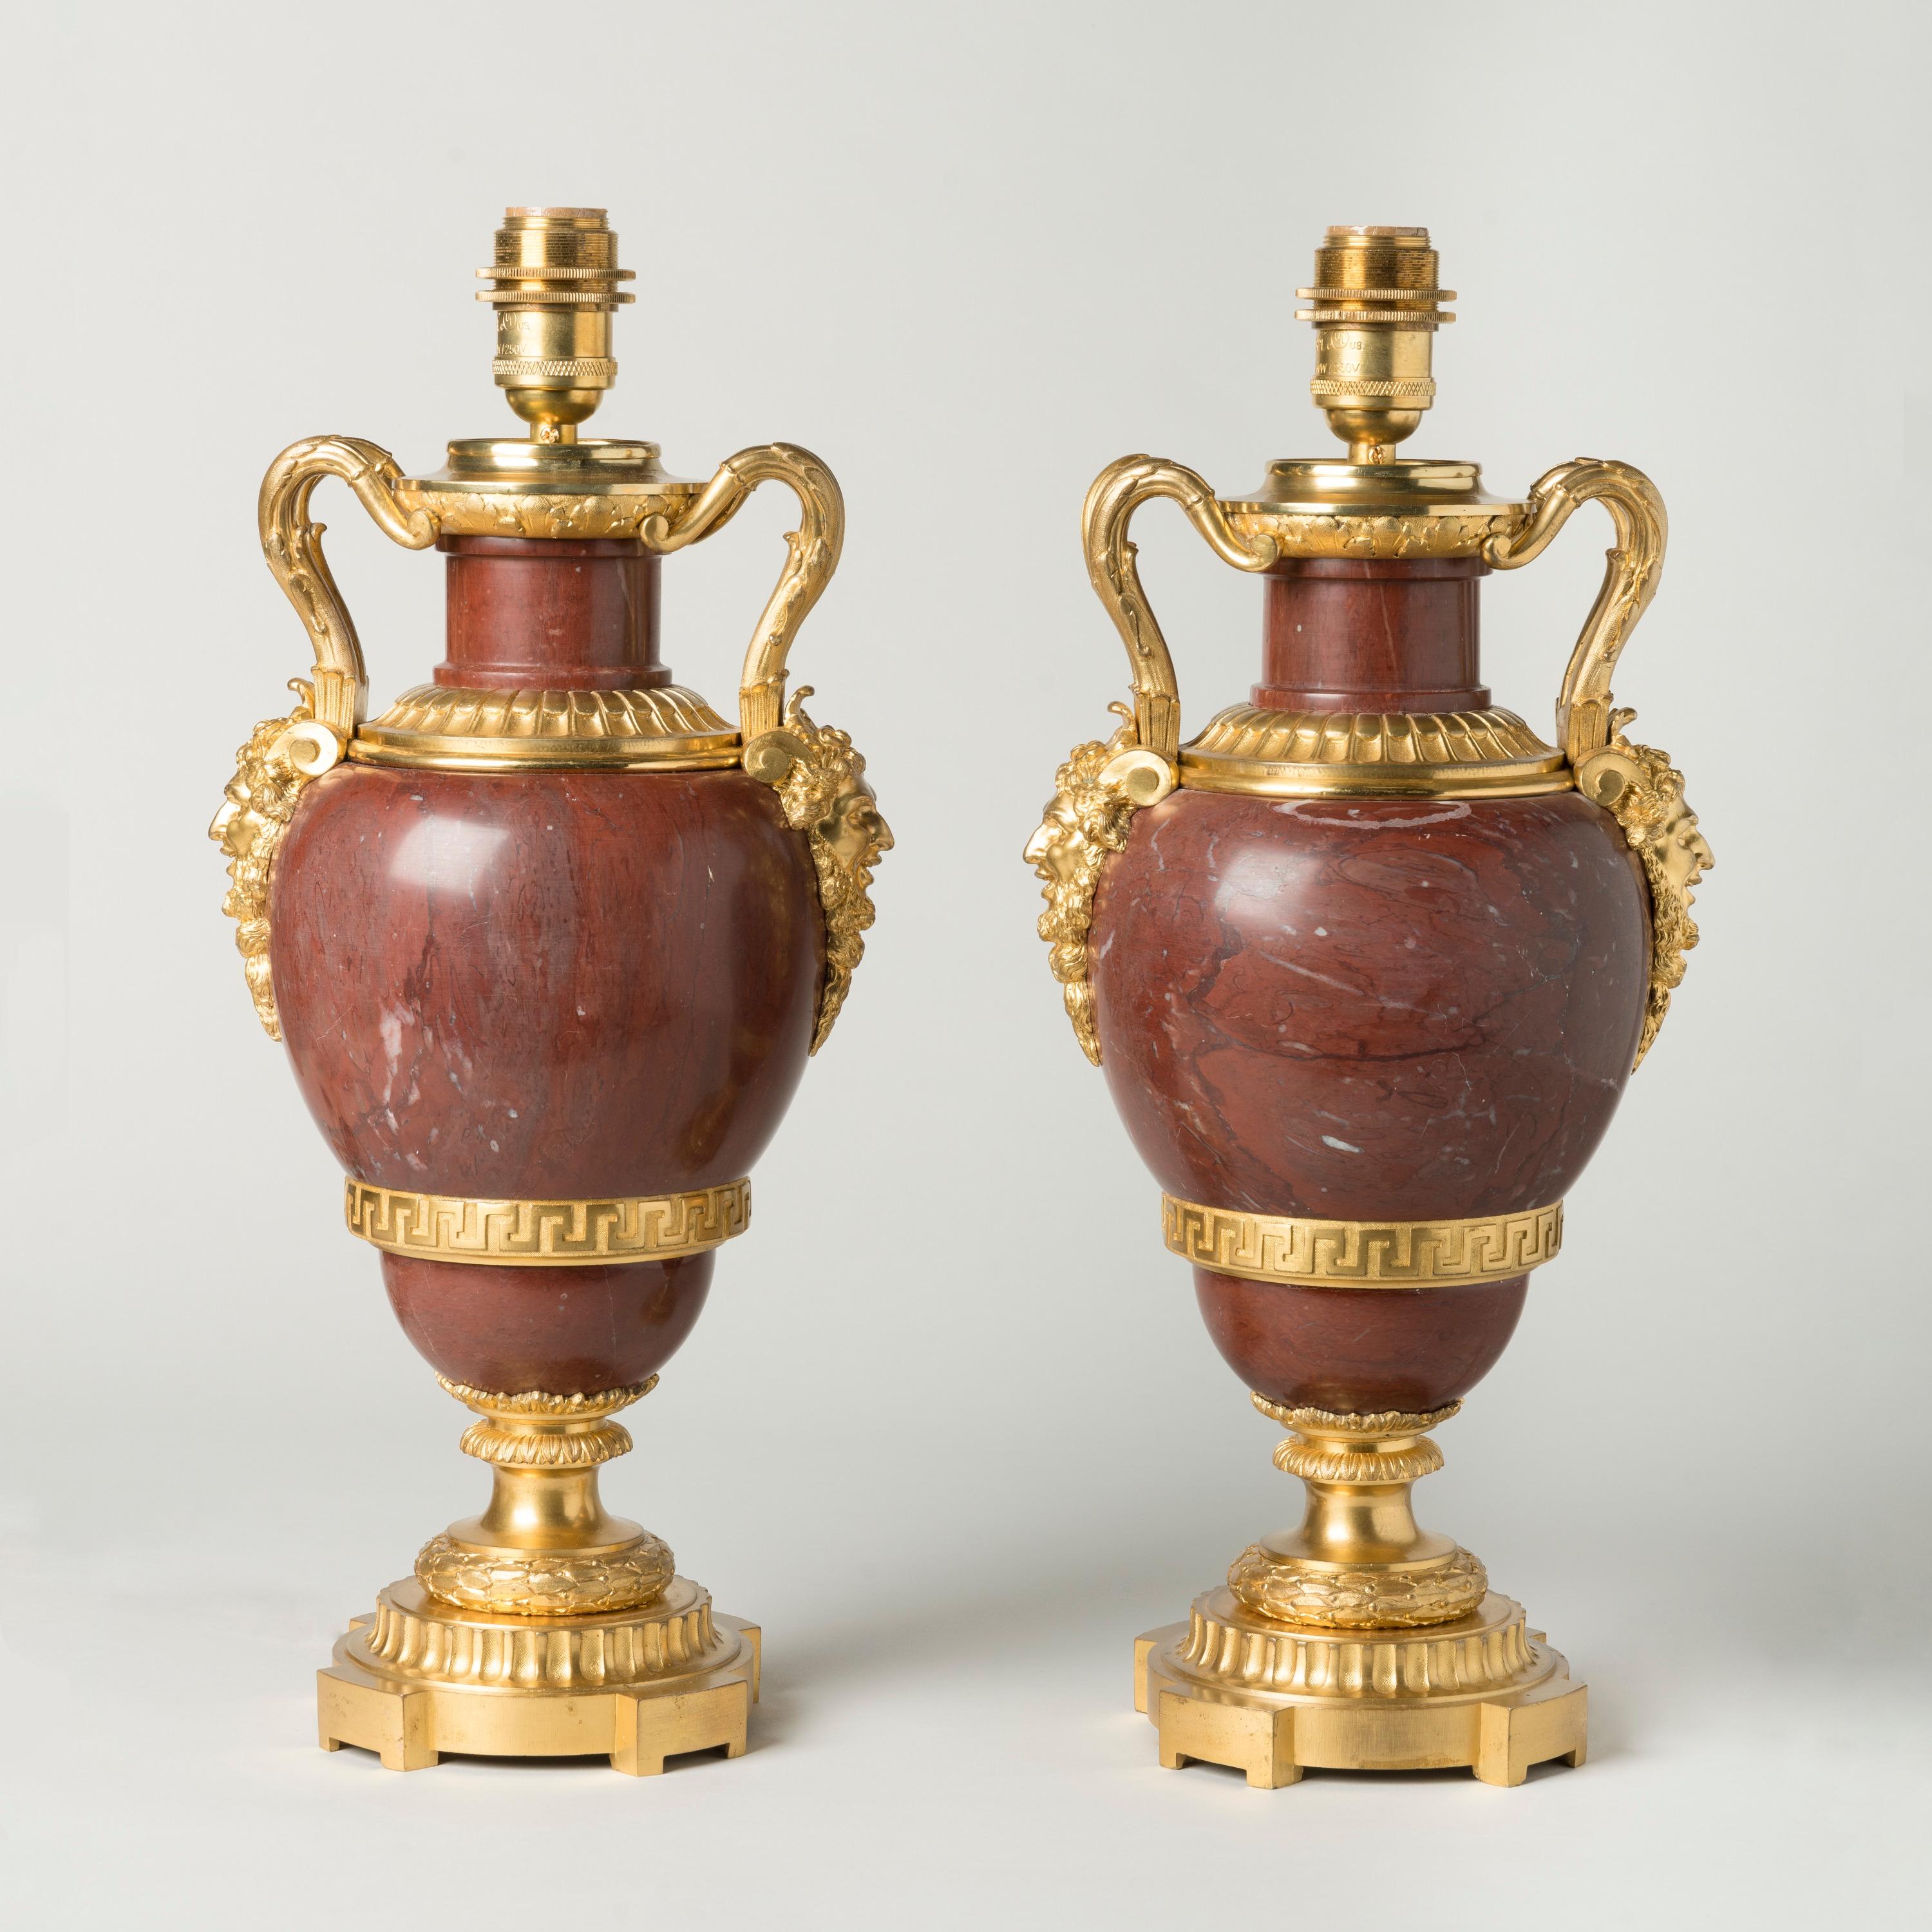 A Pair of French Ormolu-Mounted Red Marble Lamps

Constructed from a deep red 'Rouge Languedoc' marble, the ovoid vases decorated with fine gilt bronze mounts including the laurel wreaths resting on the fluted plinths, Greek scroll bands, and the